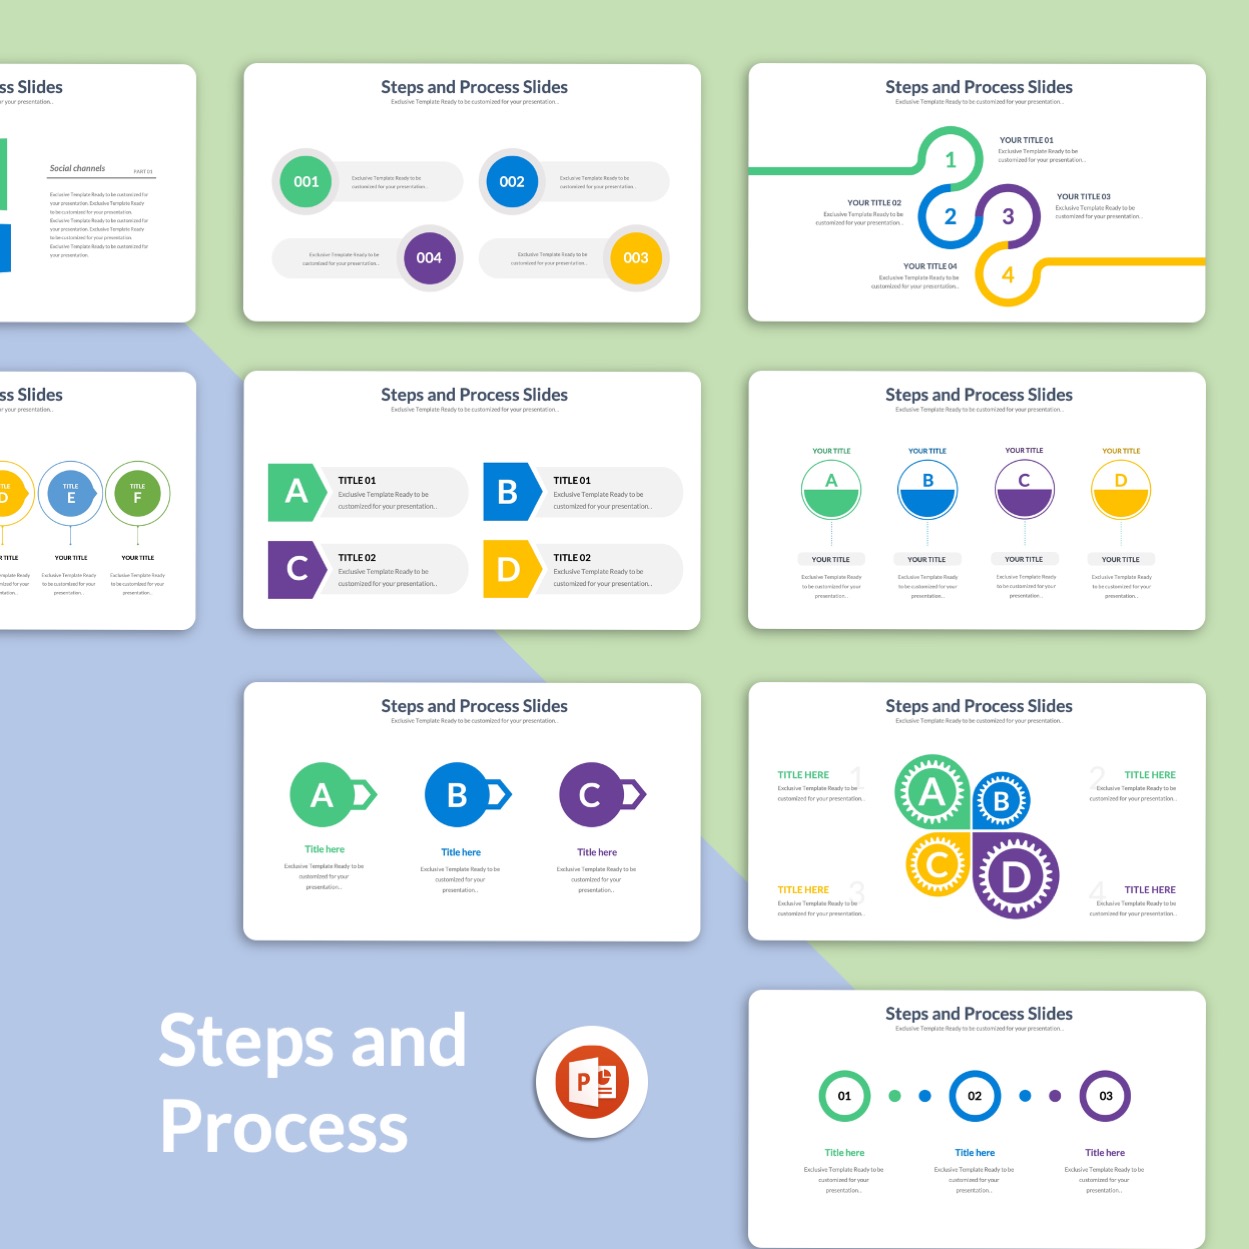 Steps And Process Slides Template0000 1 